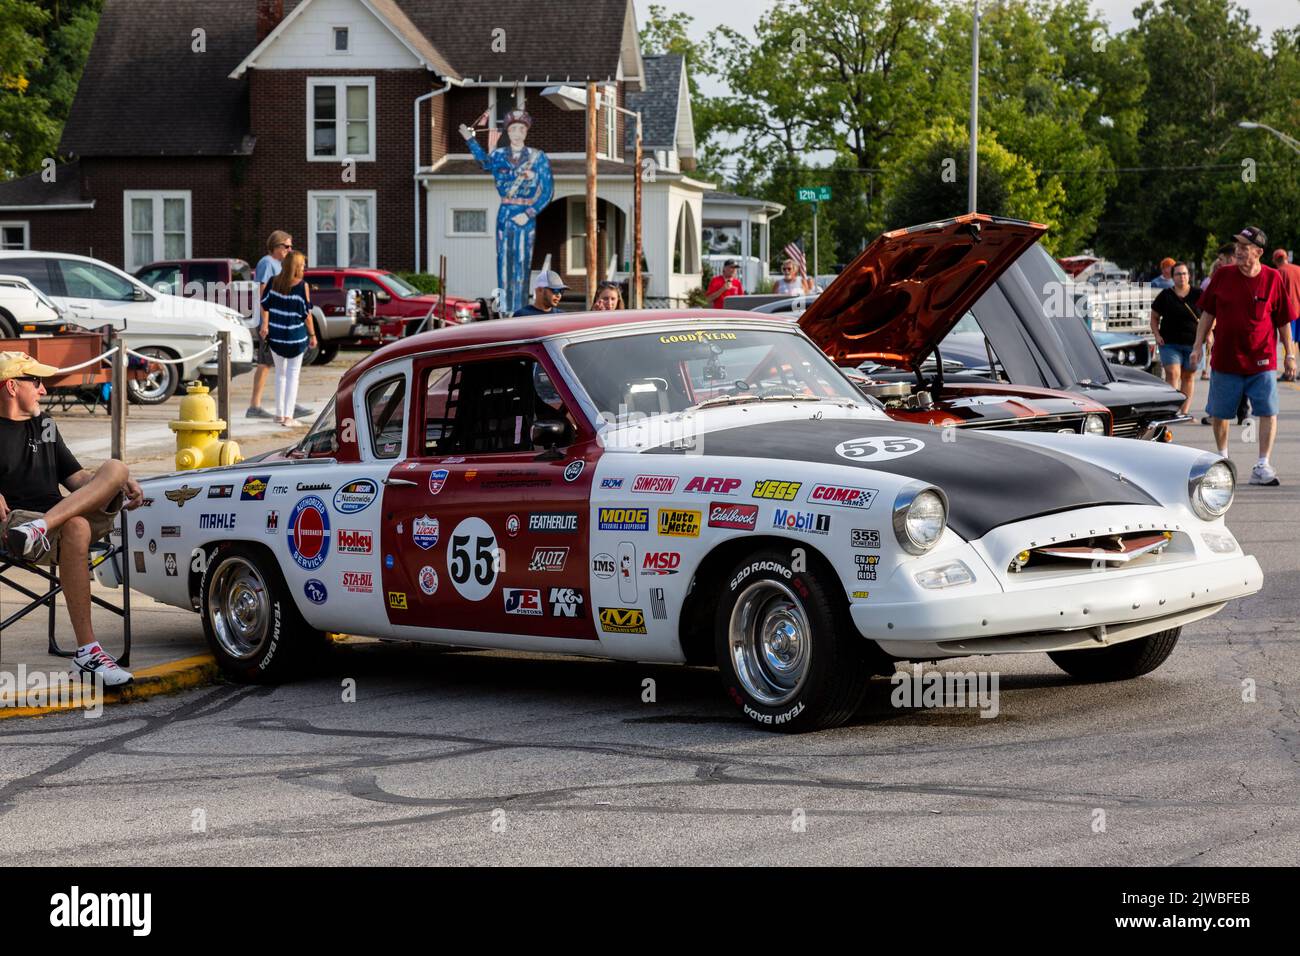 An vintage 1955 Studebaker Commander race car on display at a car show in Auburn, Indiana, USA. Stock Photo